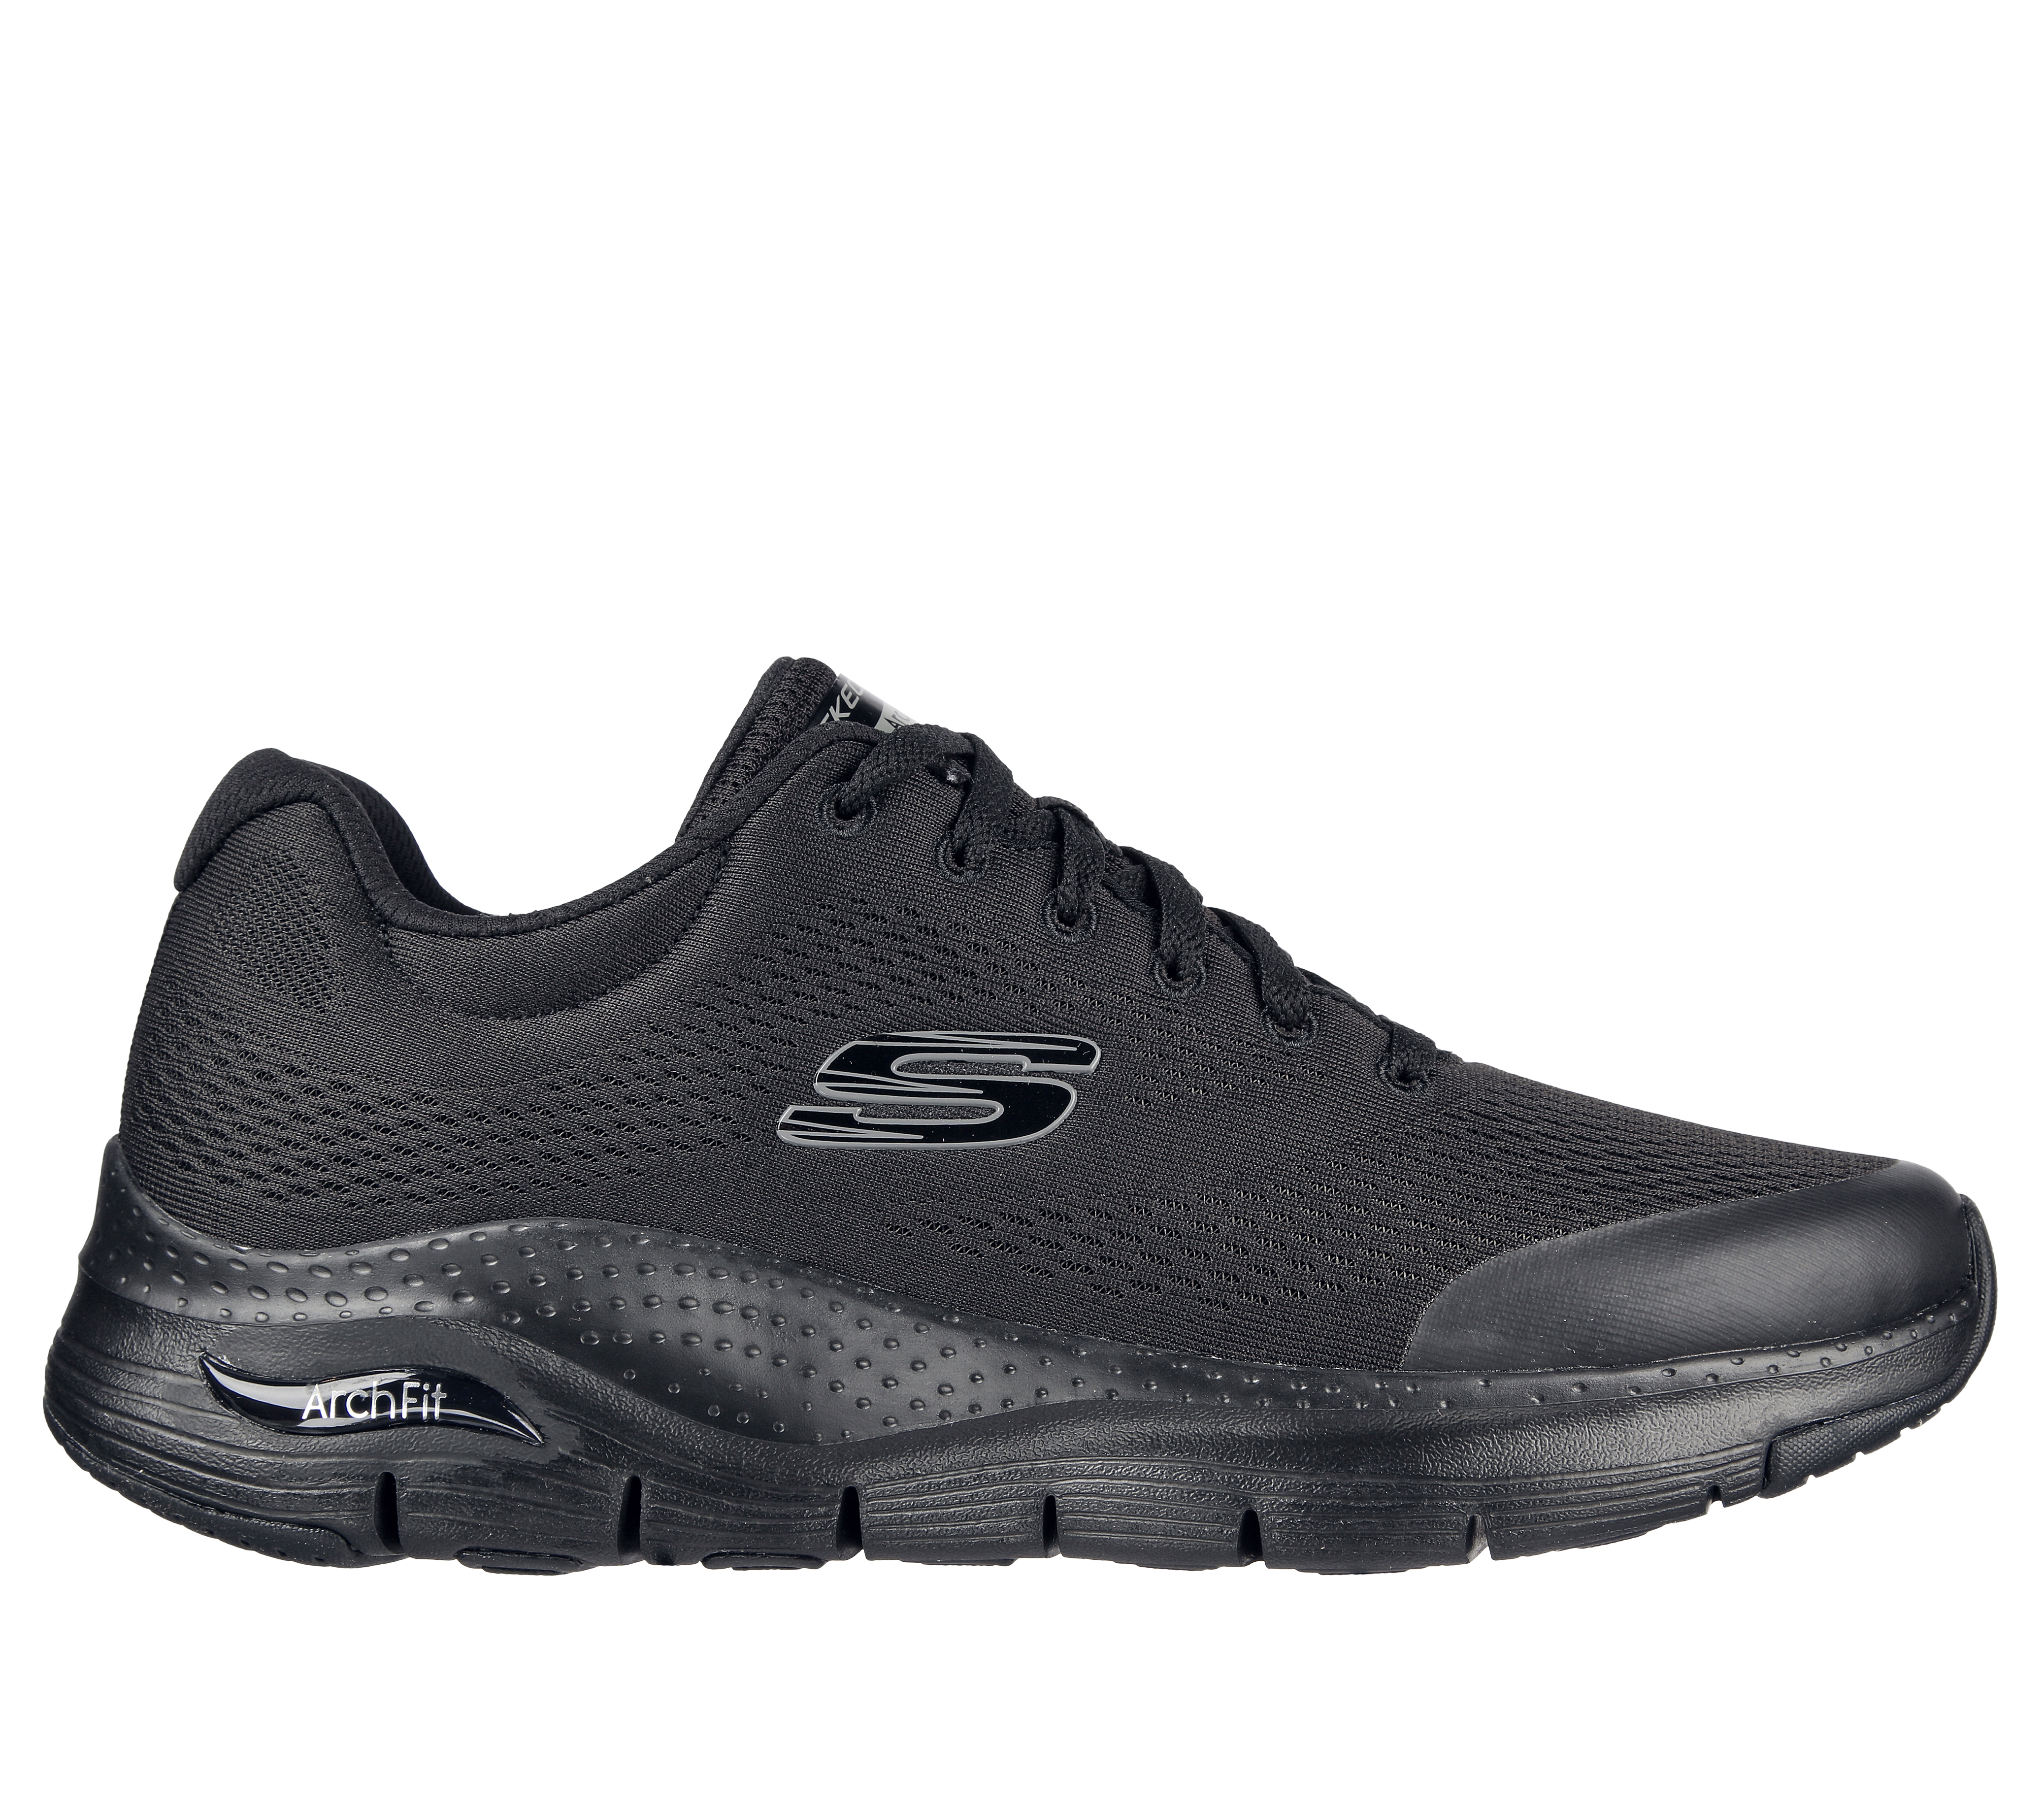 Are Skechers Good Support Shoes?